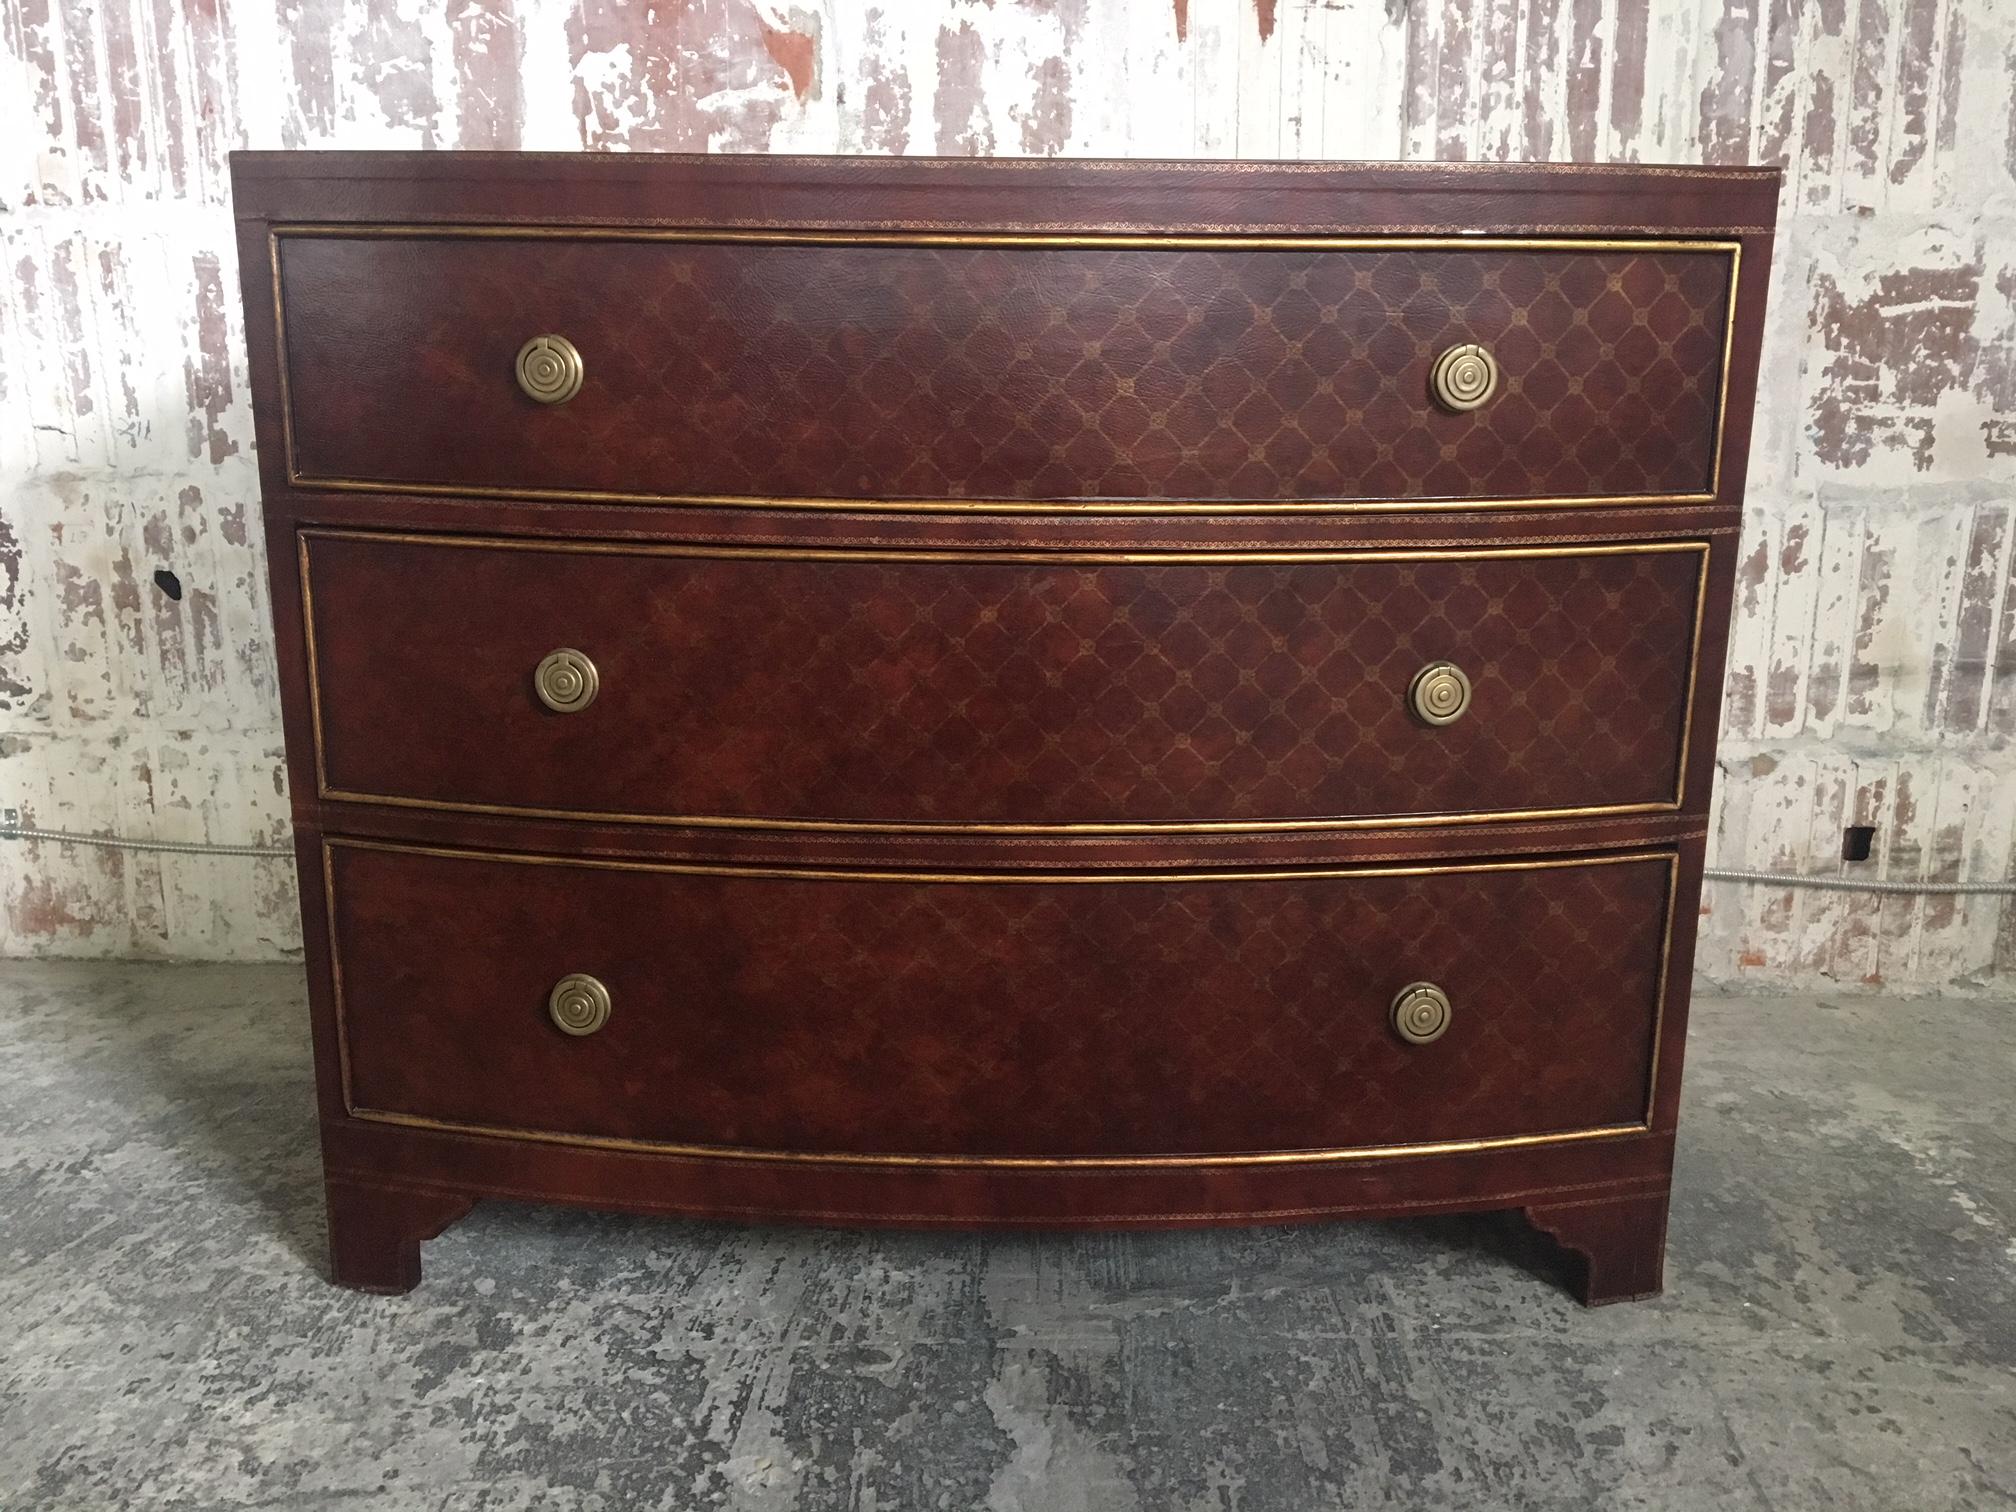 Three-drawer dresser by Ferguson Copeland, Ltd. features leather-wrapped finish accented with brass detailing and brass hardware. Good vintage condition, minor signs of use appropriate with age.